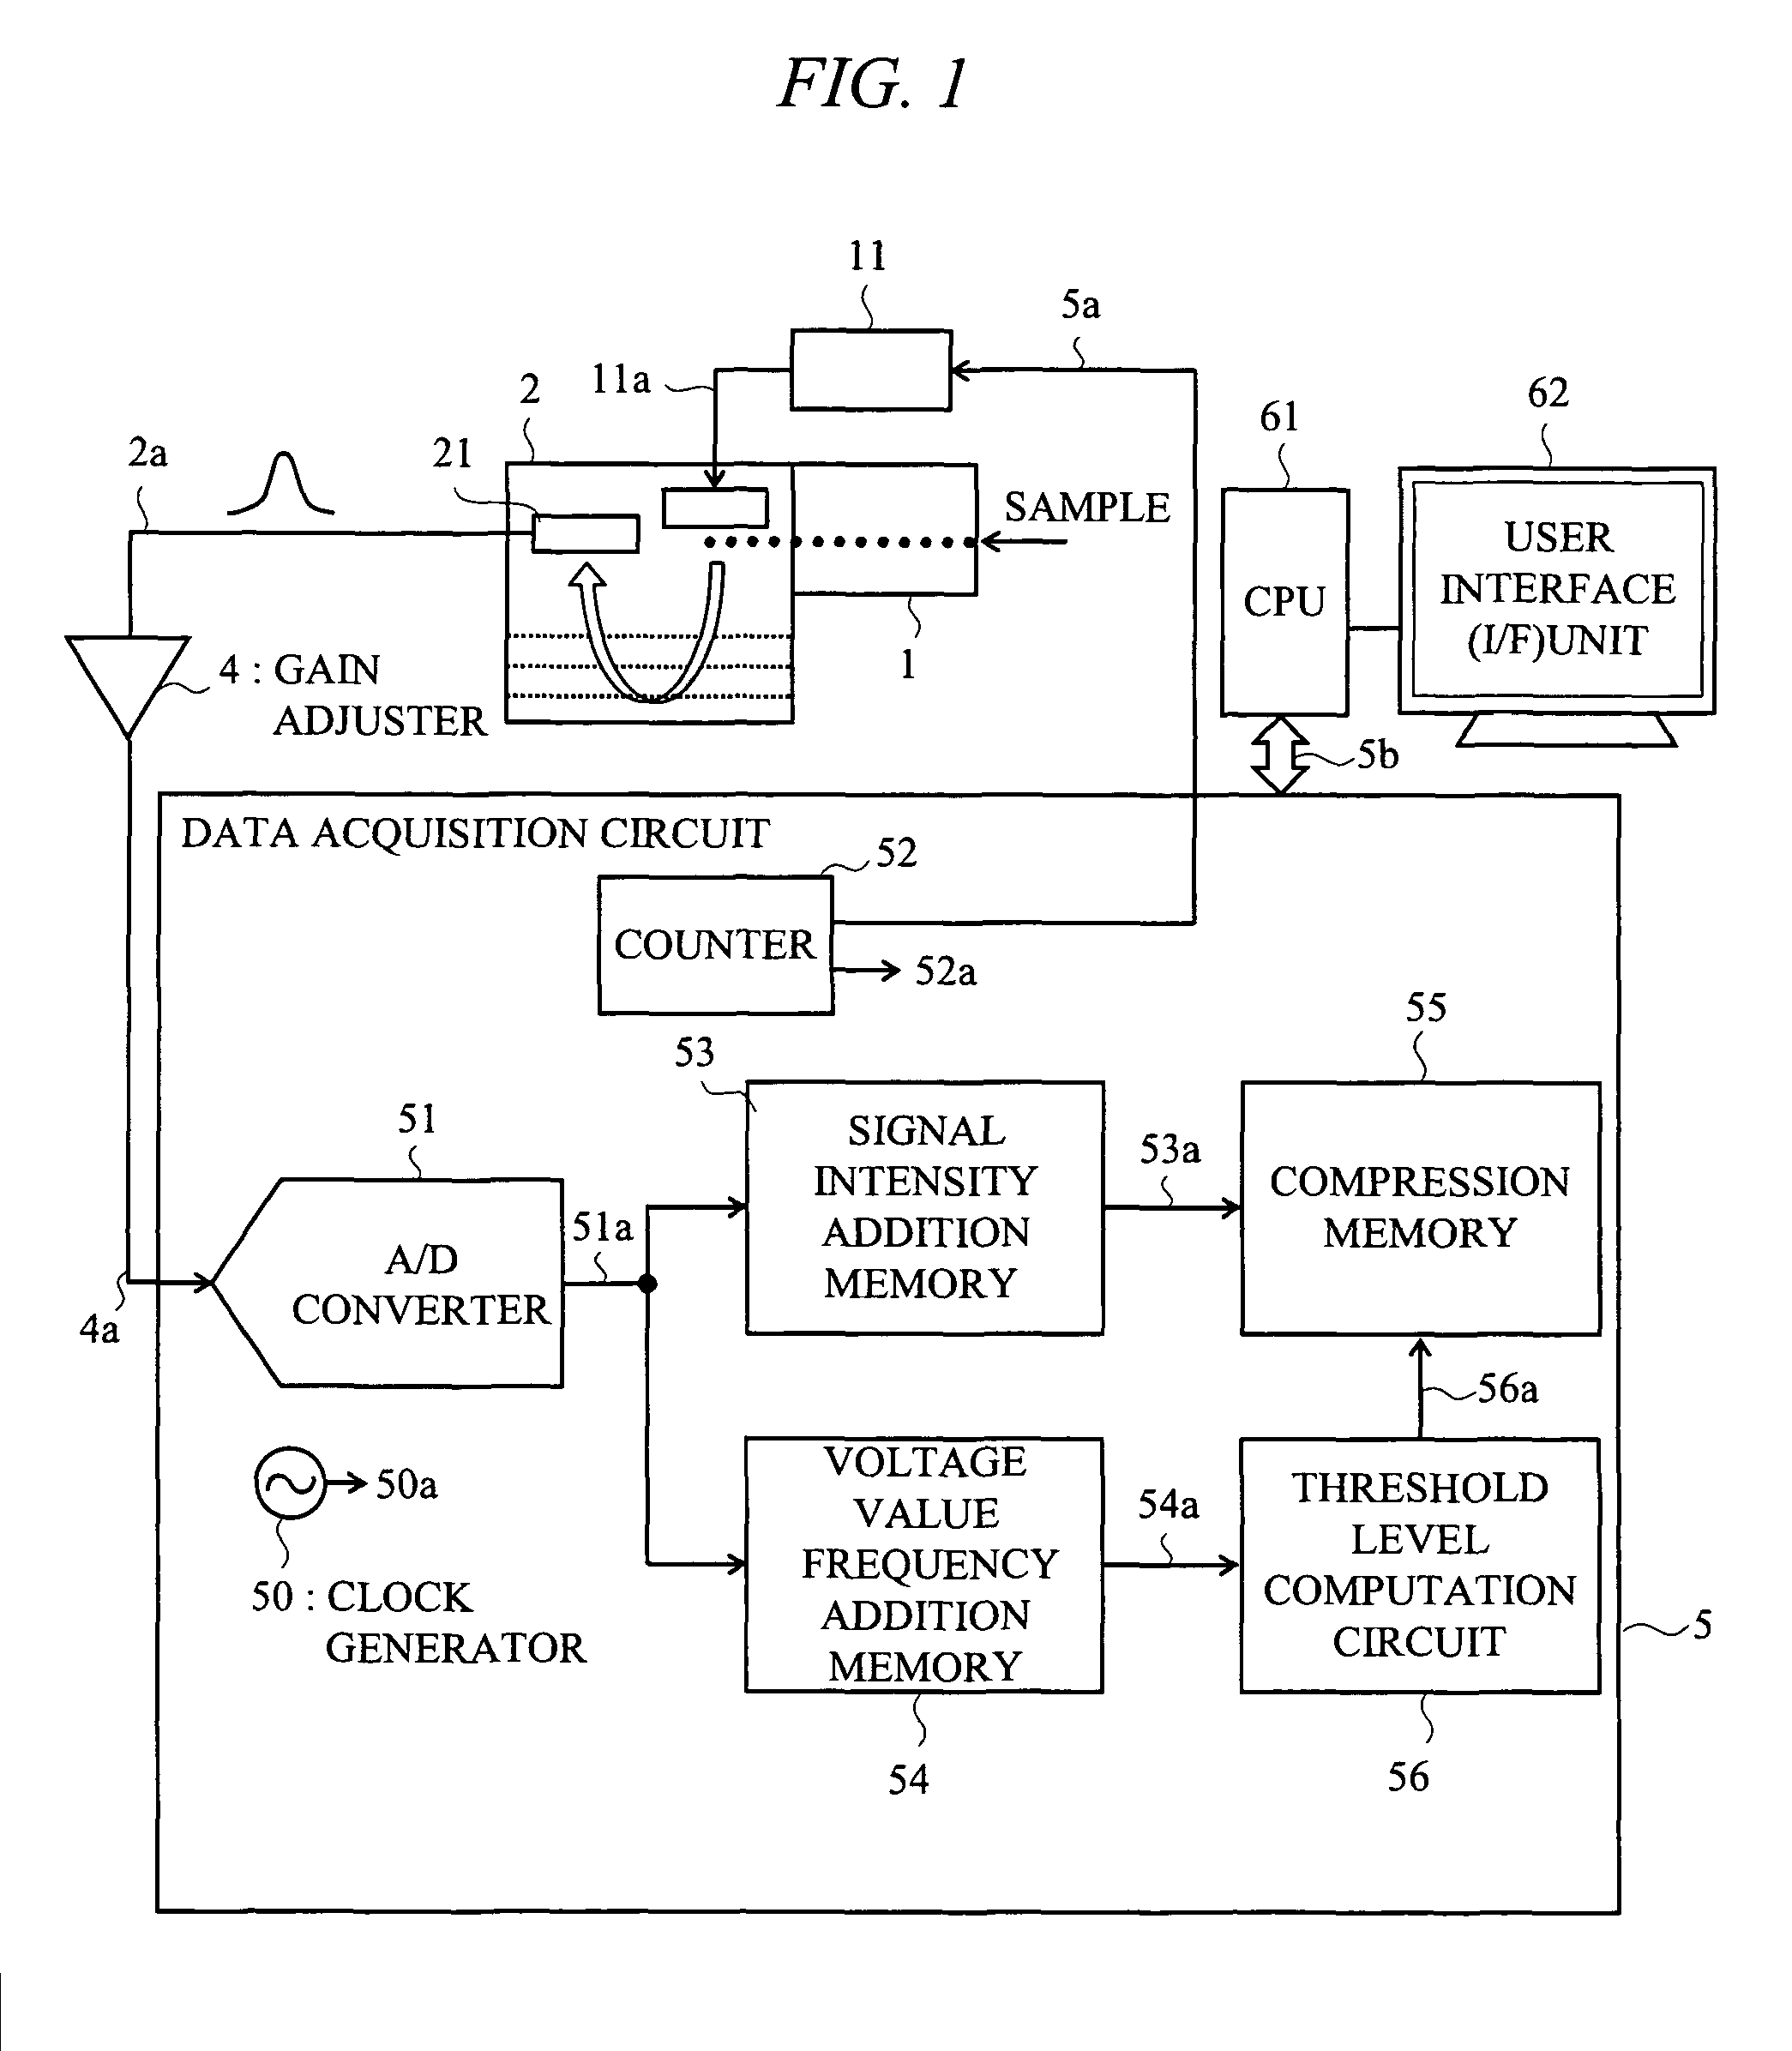 Method and apparatus for mass spectrometry